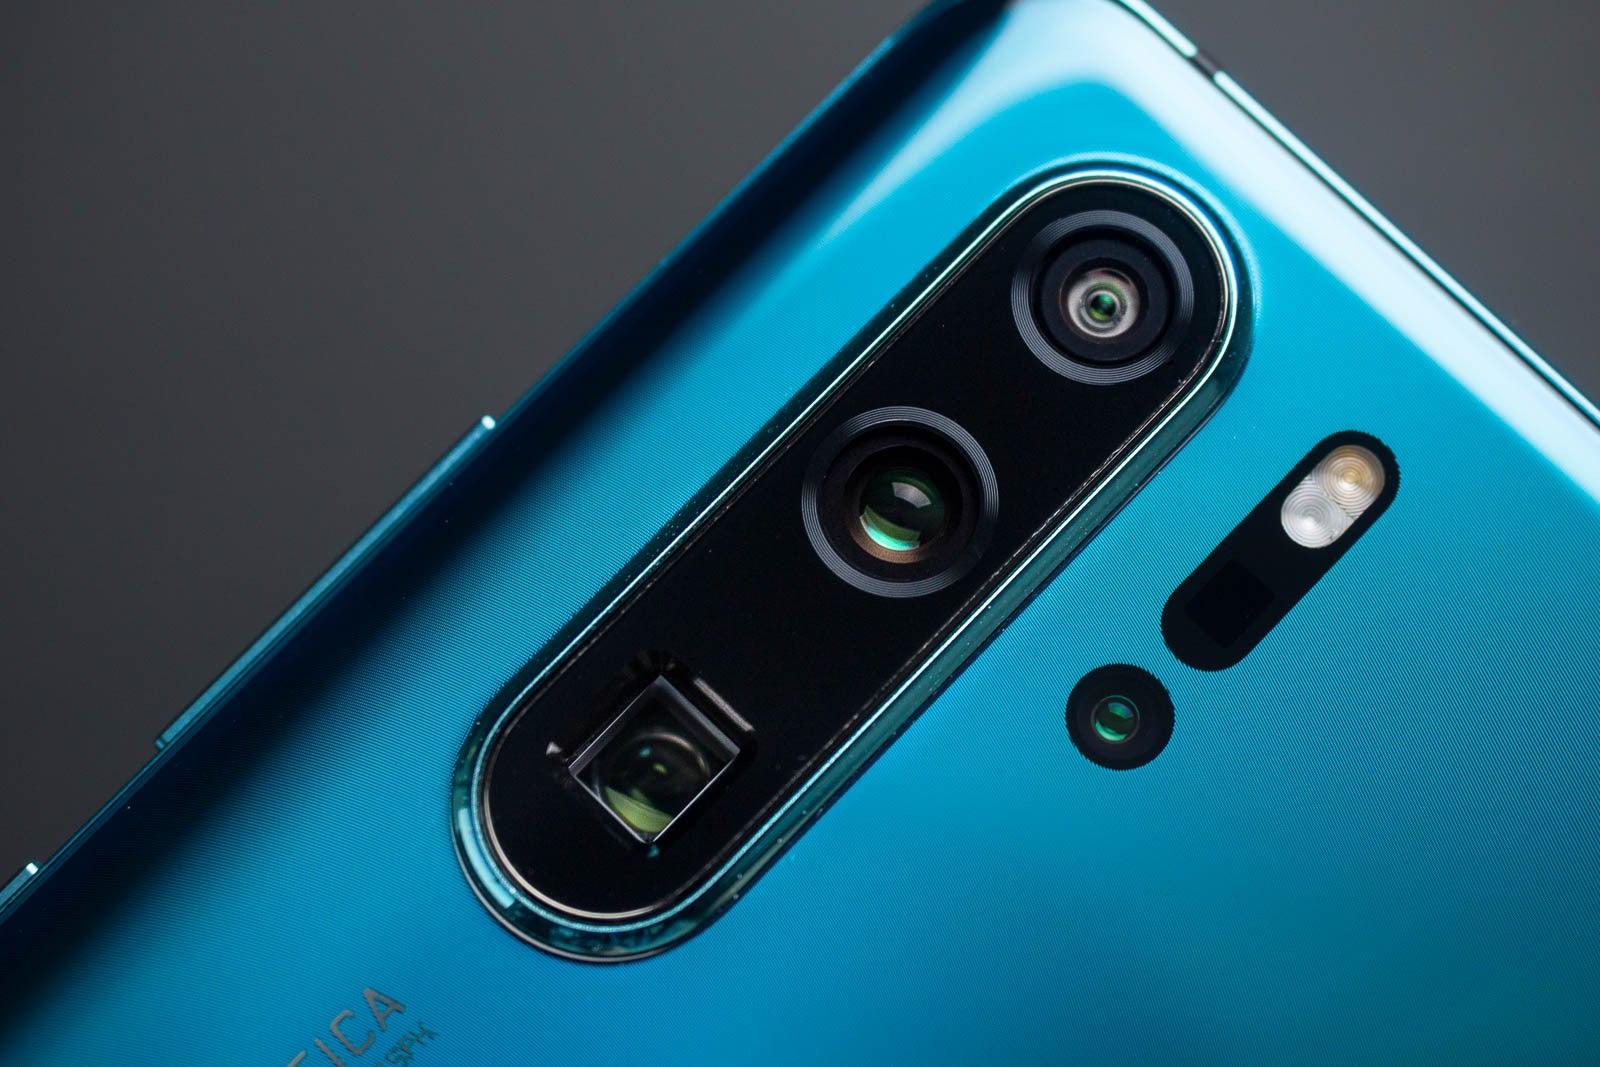 5x optical zoom just like the Huawei P30 Pro - Huge Galaxy S11 camera upgrades could include 5x optical zoom